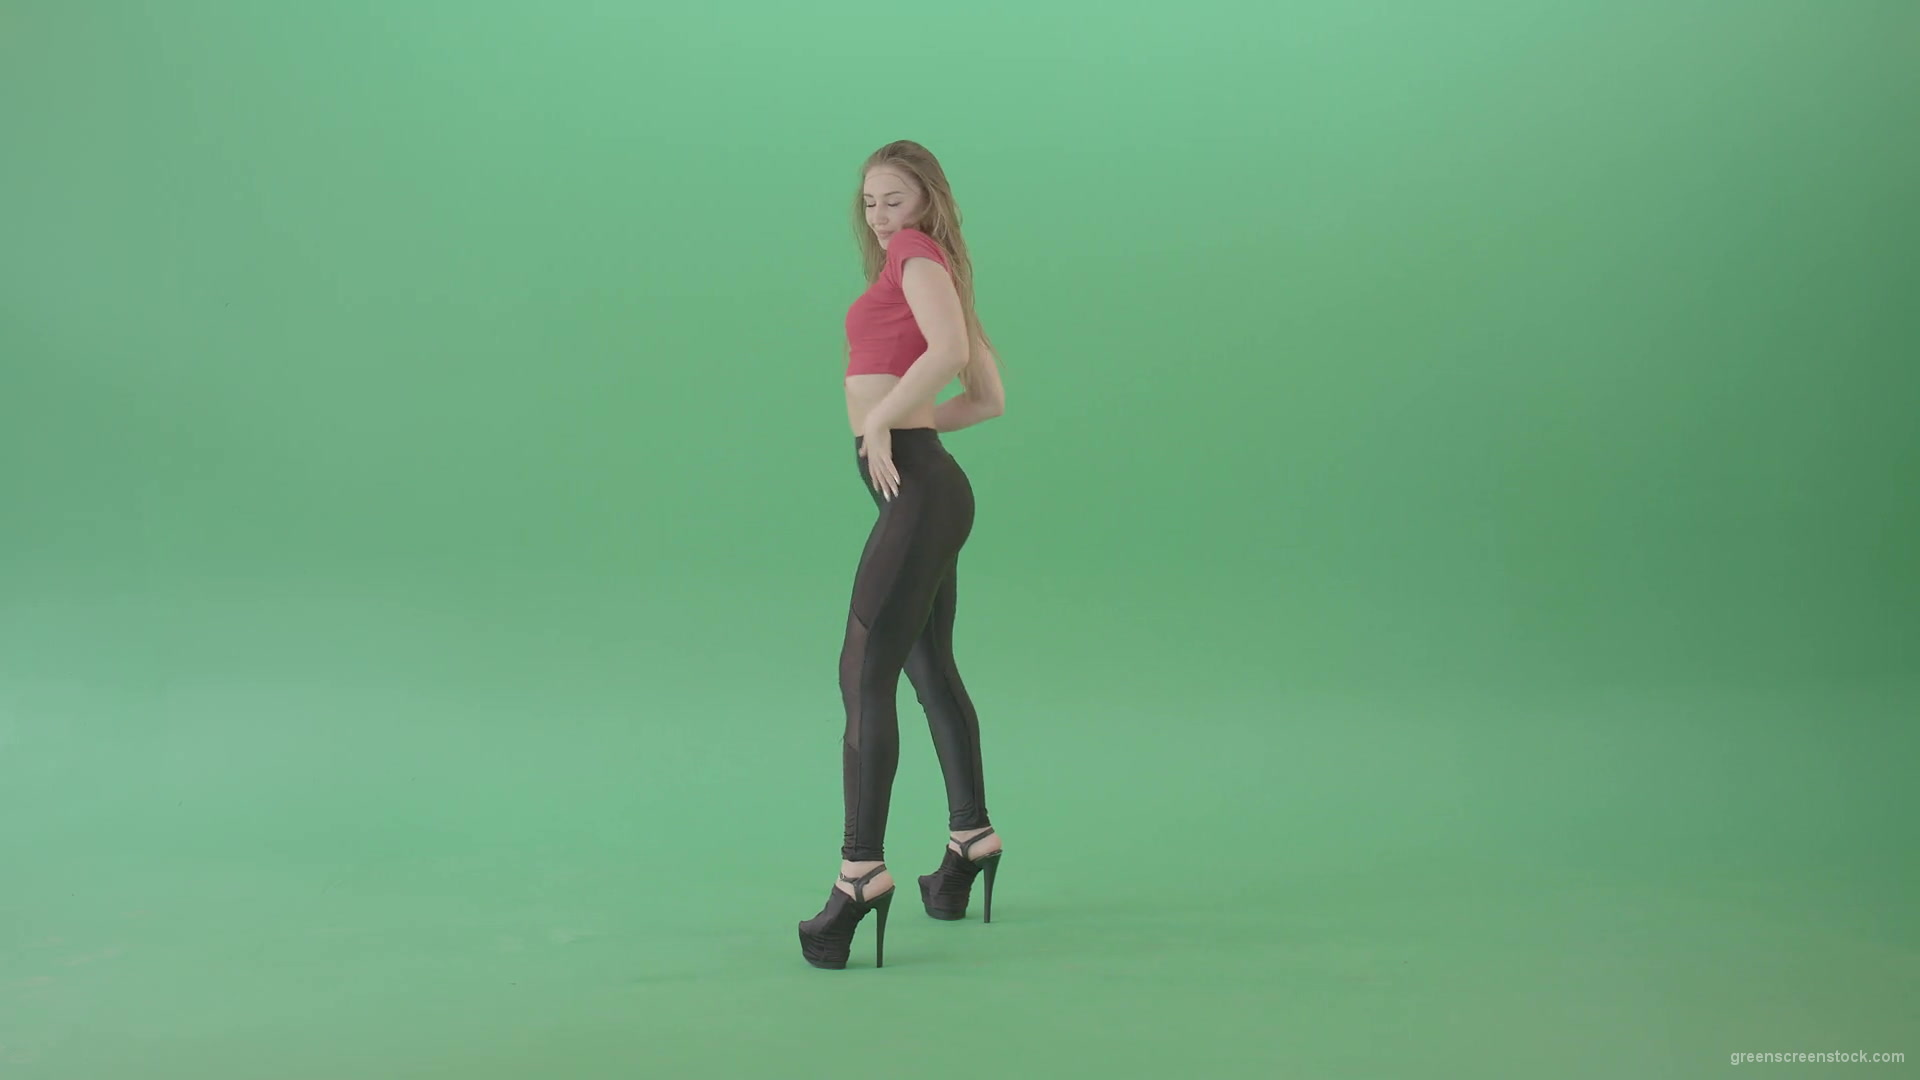 Sexy-posing-girl-showing-buts-and-dancing-on-green-screen-4K-Video-Footage-1920_004 Green Screen Stock